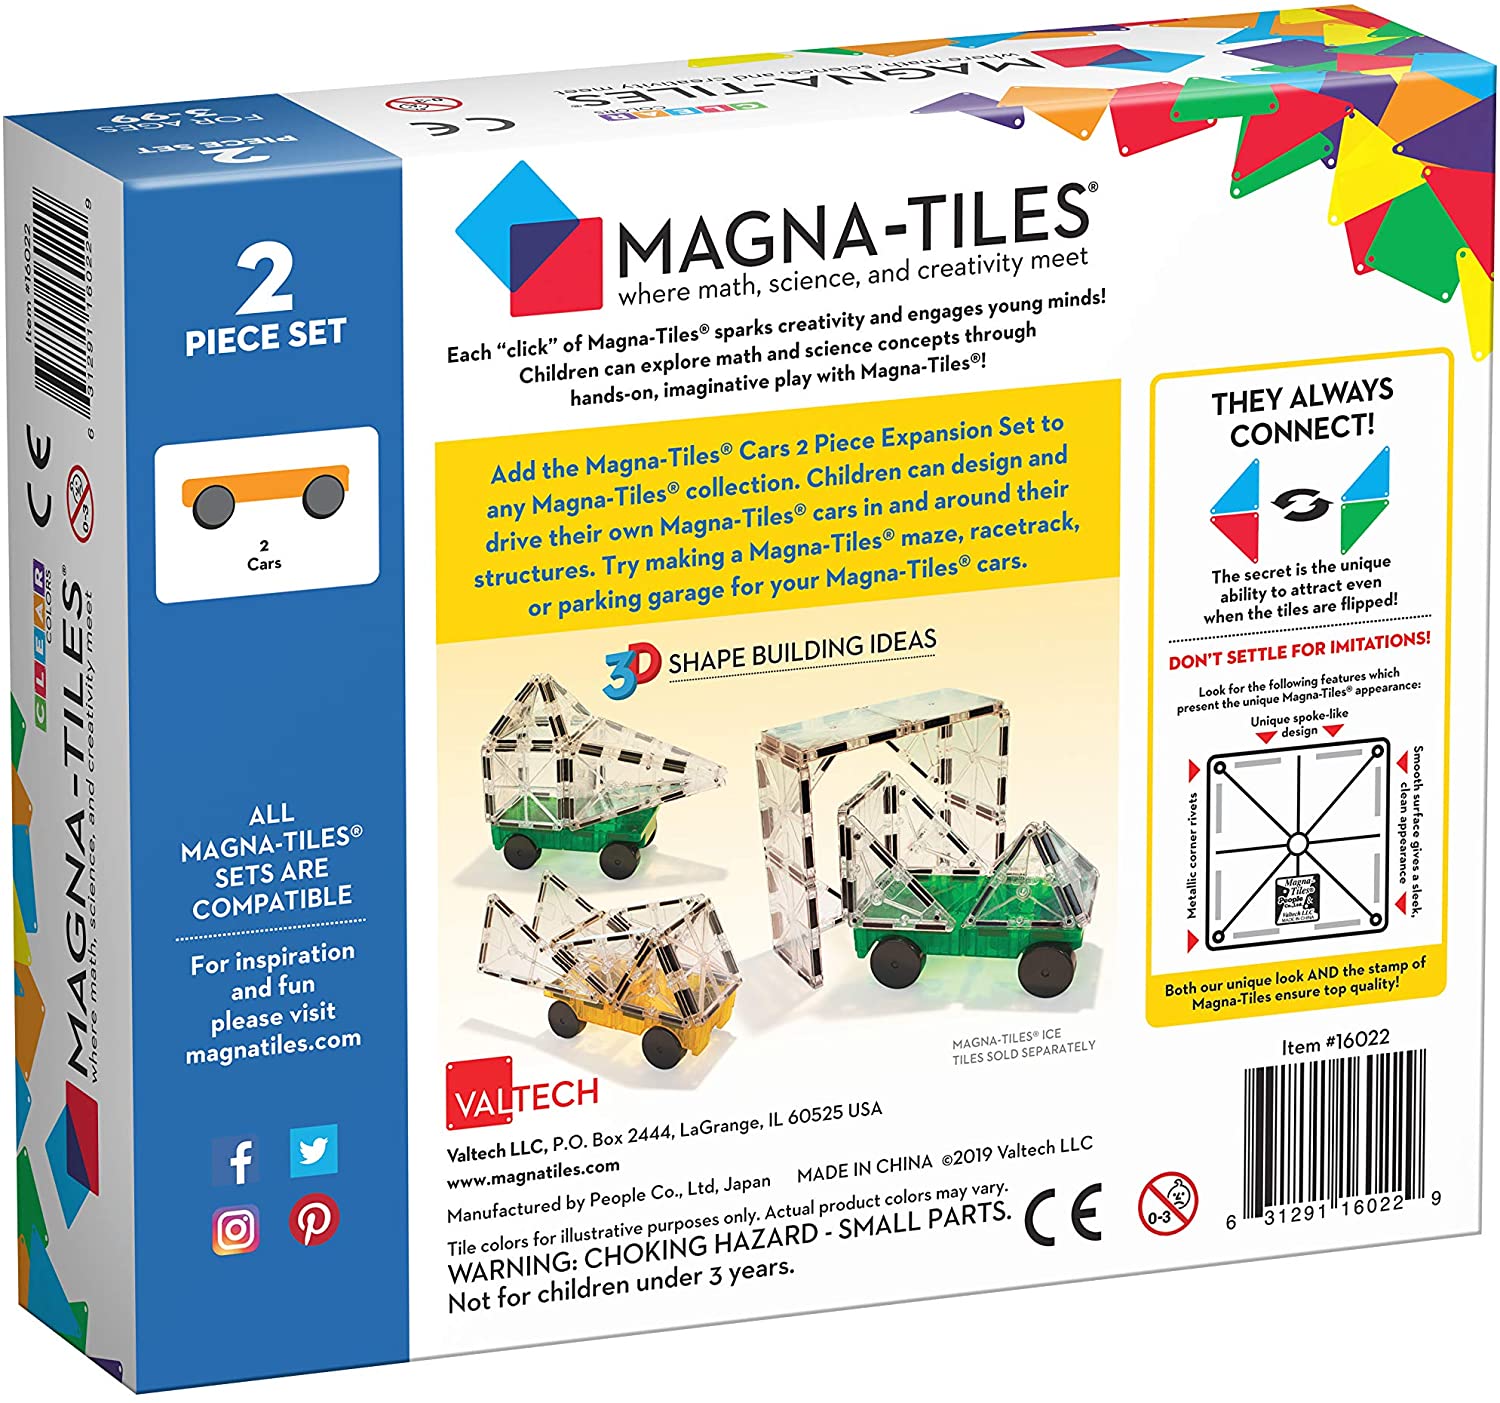 Magna-Tiles Cars 2 Piece Expansion Set - A2Z Science & Learning Store